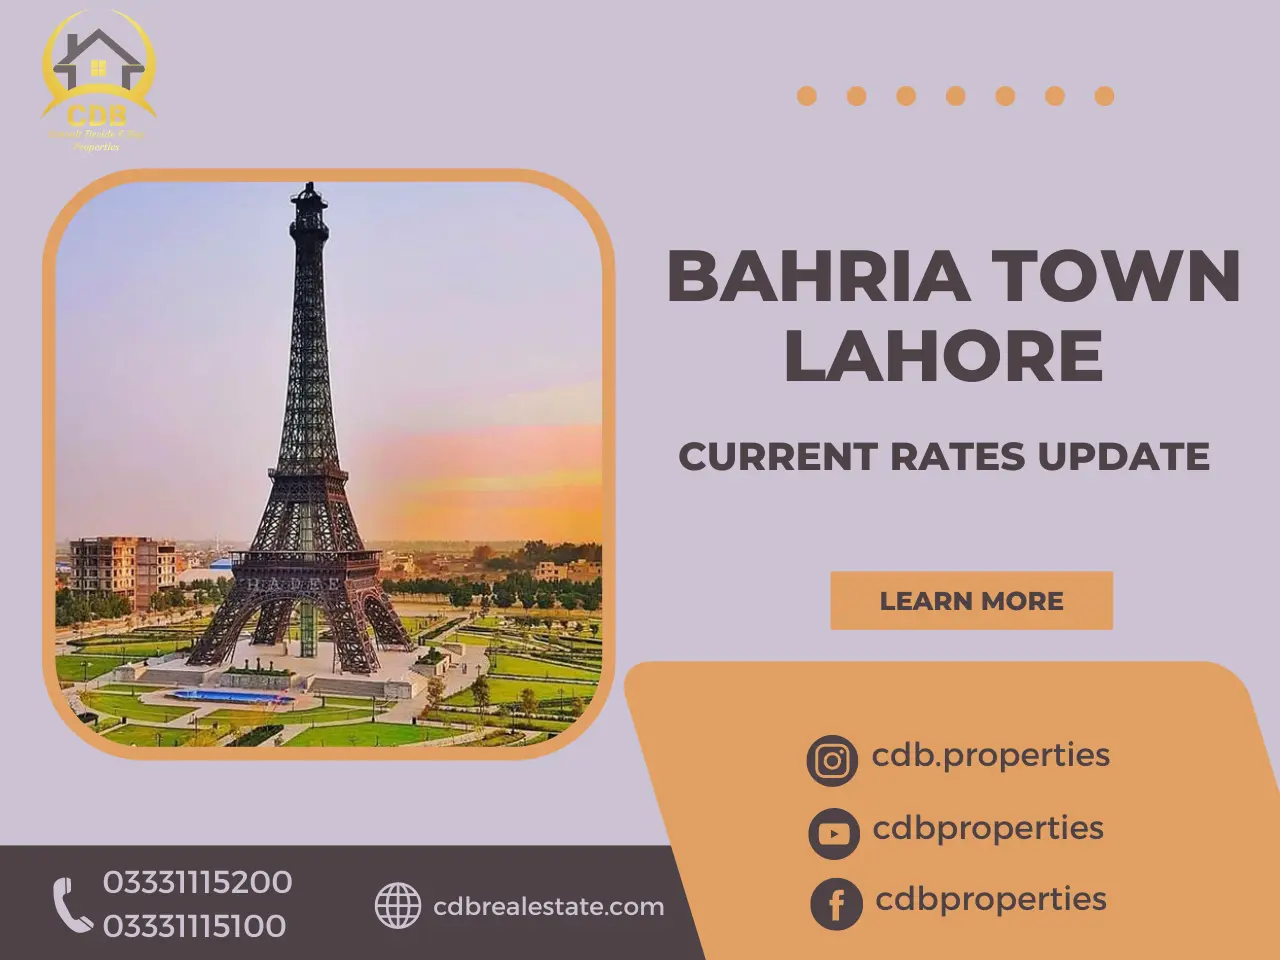 Bahria Town Lahore Rates Update